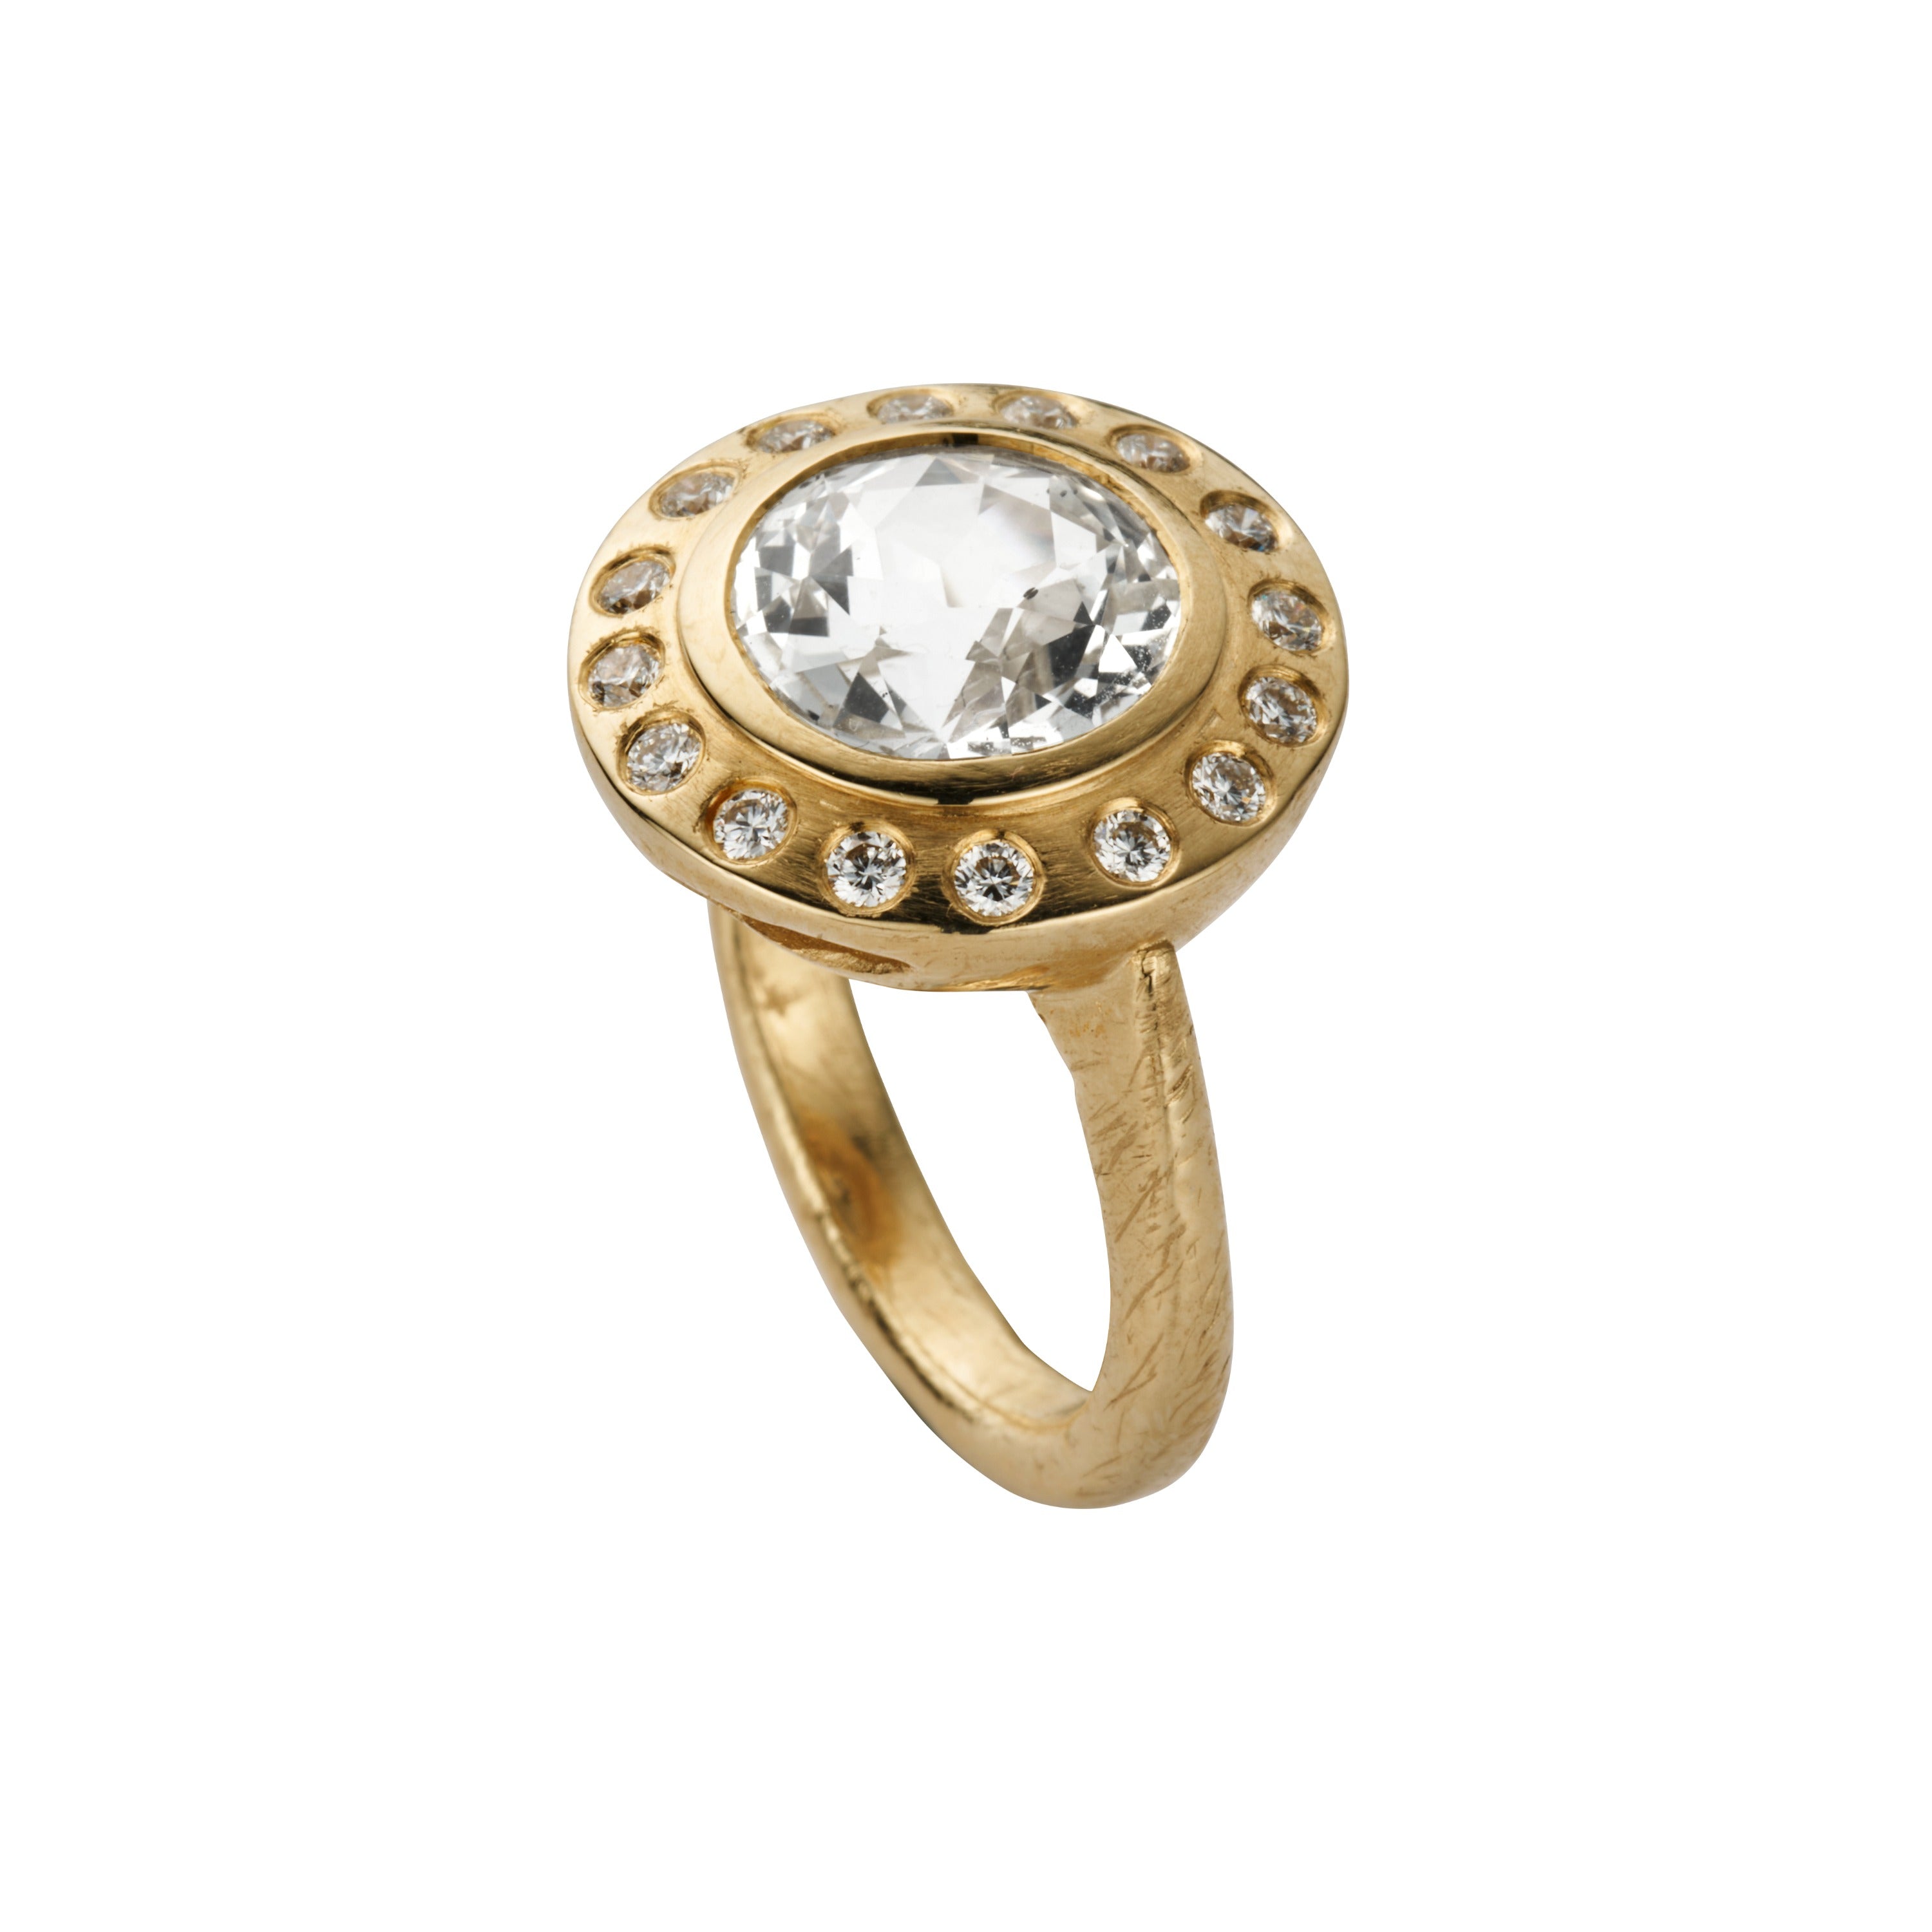 ADELINE Gold White Sapphire and Diamond Ring